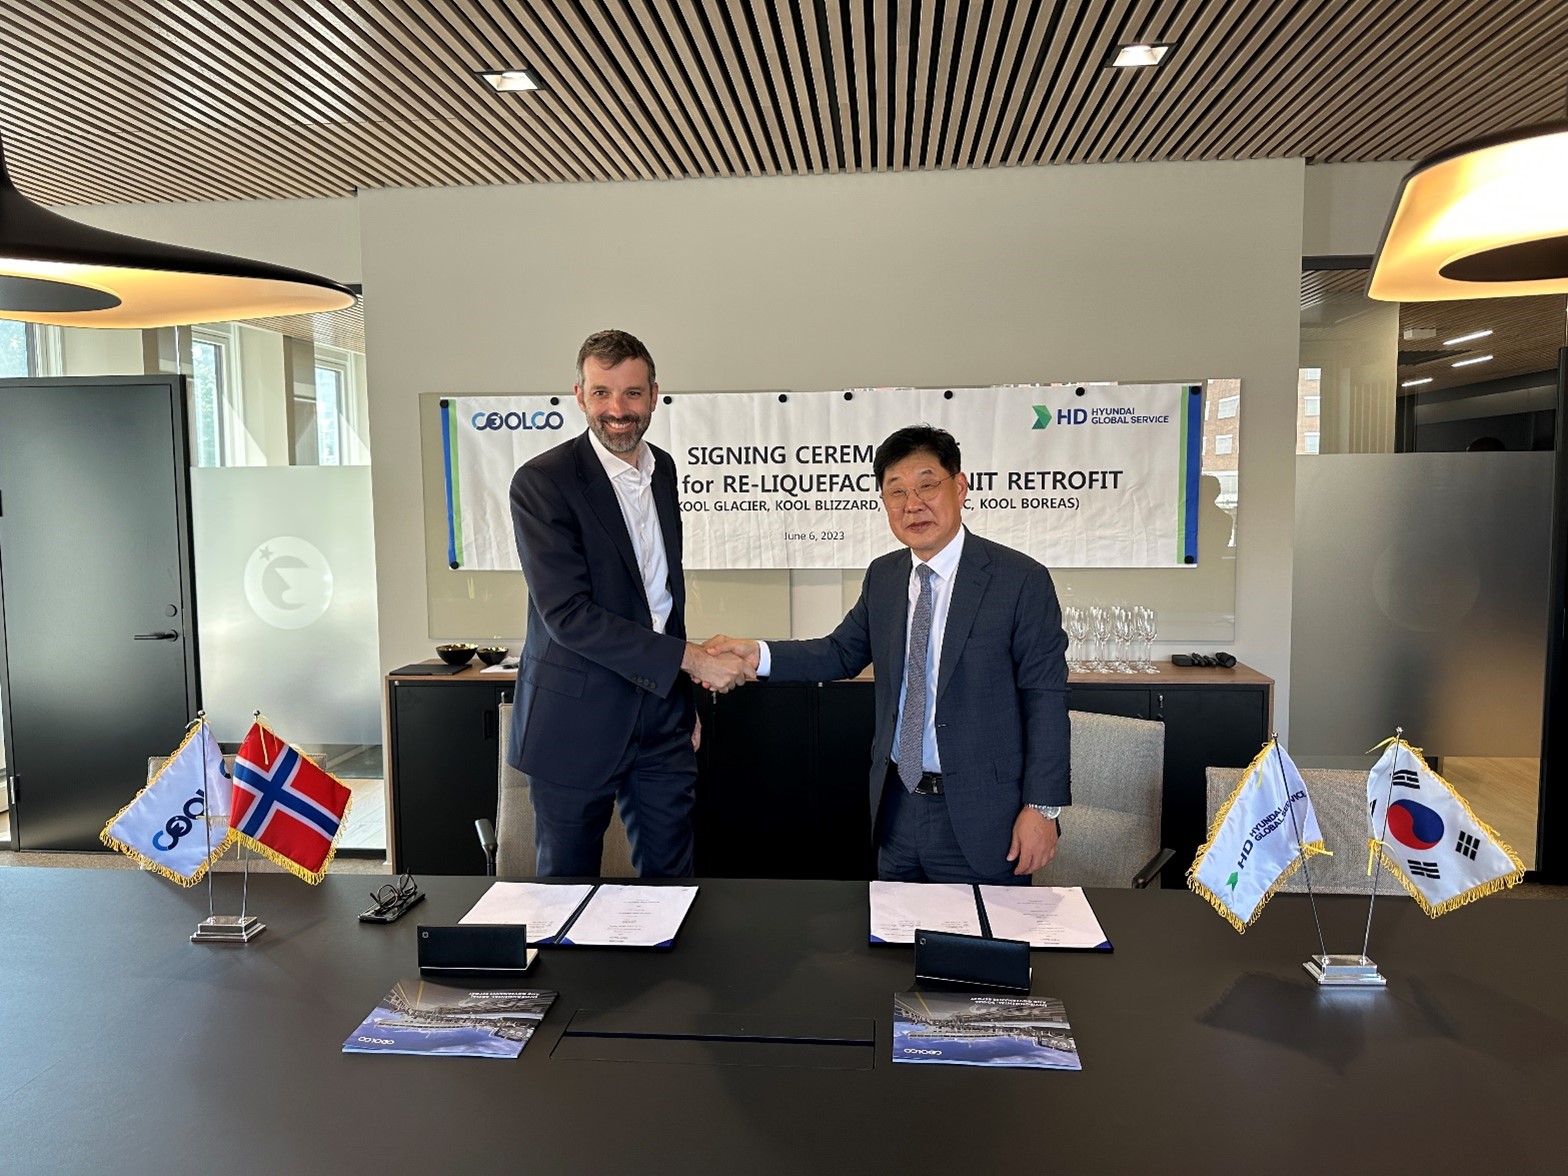 HD Hyundai Global Service Signs Contract with CoolCo for LNG Boil-off Reliquefaction Unit Retrofit